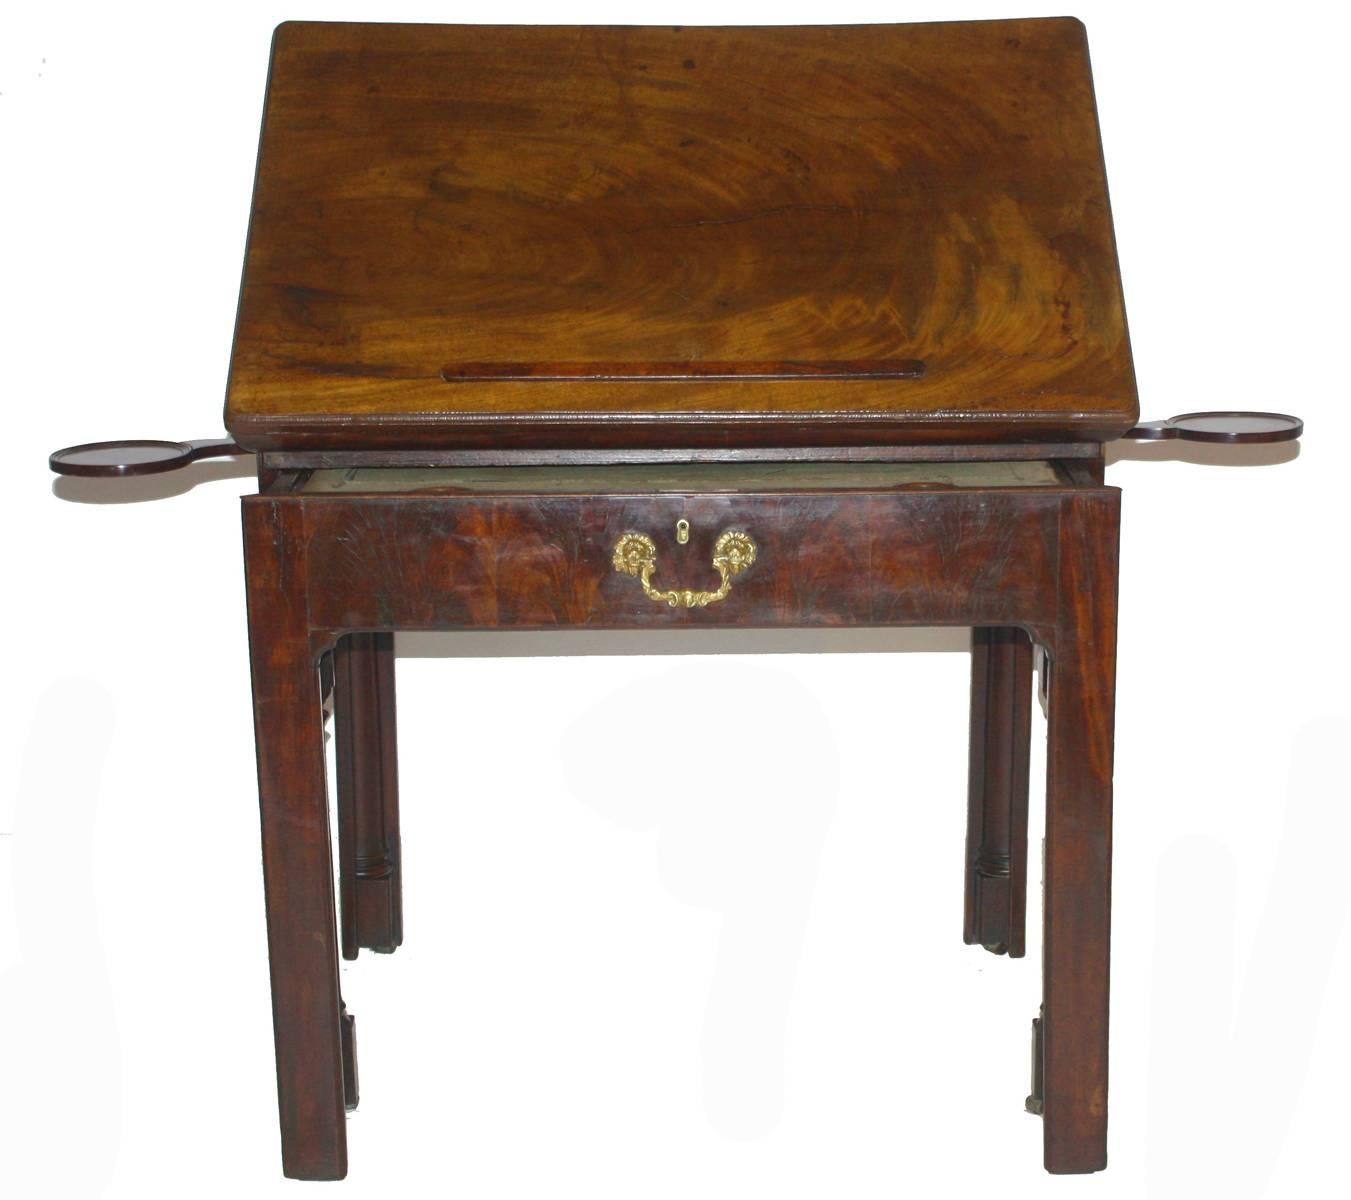 an 18th century, English architect's drawing table / desk of mahogany, the hinged top adjusts to various angles, the table / drawer extends as a writing/working surface with old worn baize top, it opens to reveal compartments for storage, small